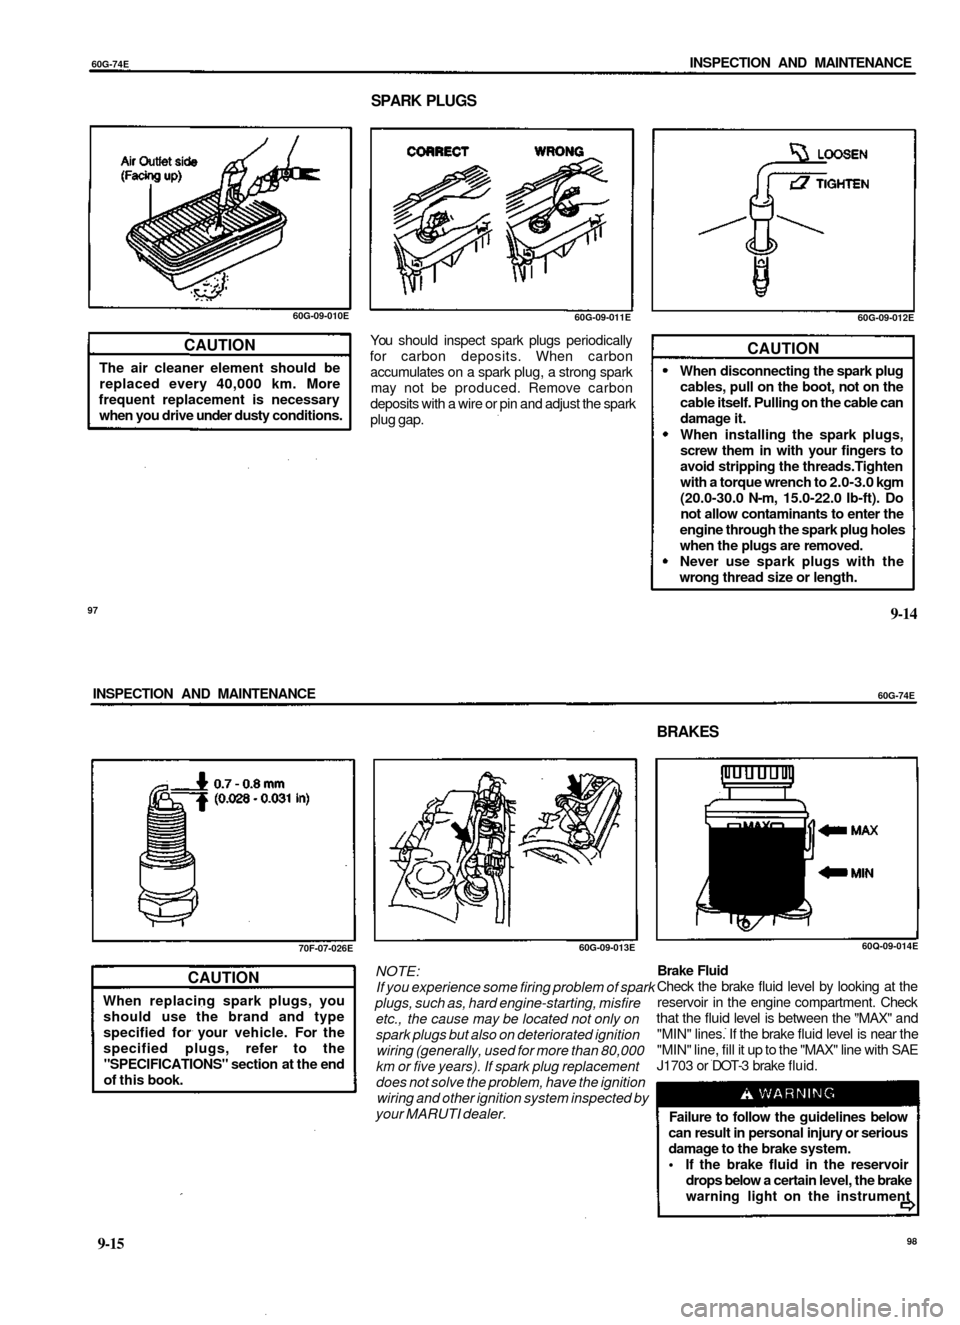 SUZUKI BALENO 1999 1.G User Guide 
60G-74E 
INSPECTION AND MAINTENANCE

SPARK PLUGS

60G-09-010E

CAUTION

The air cleaner element should be

replaced every 40,000 km. More

frequent replacement is necessary

when you drive under dust